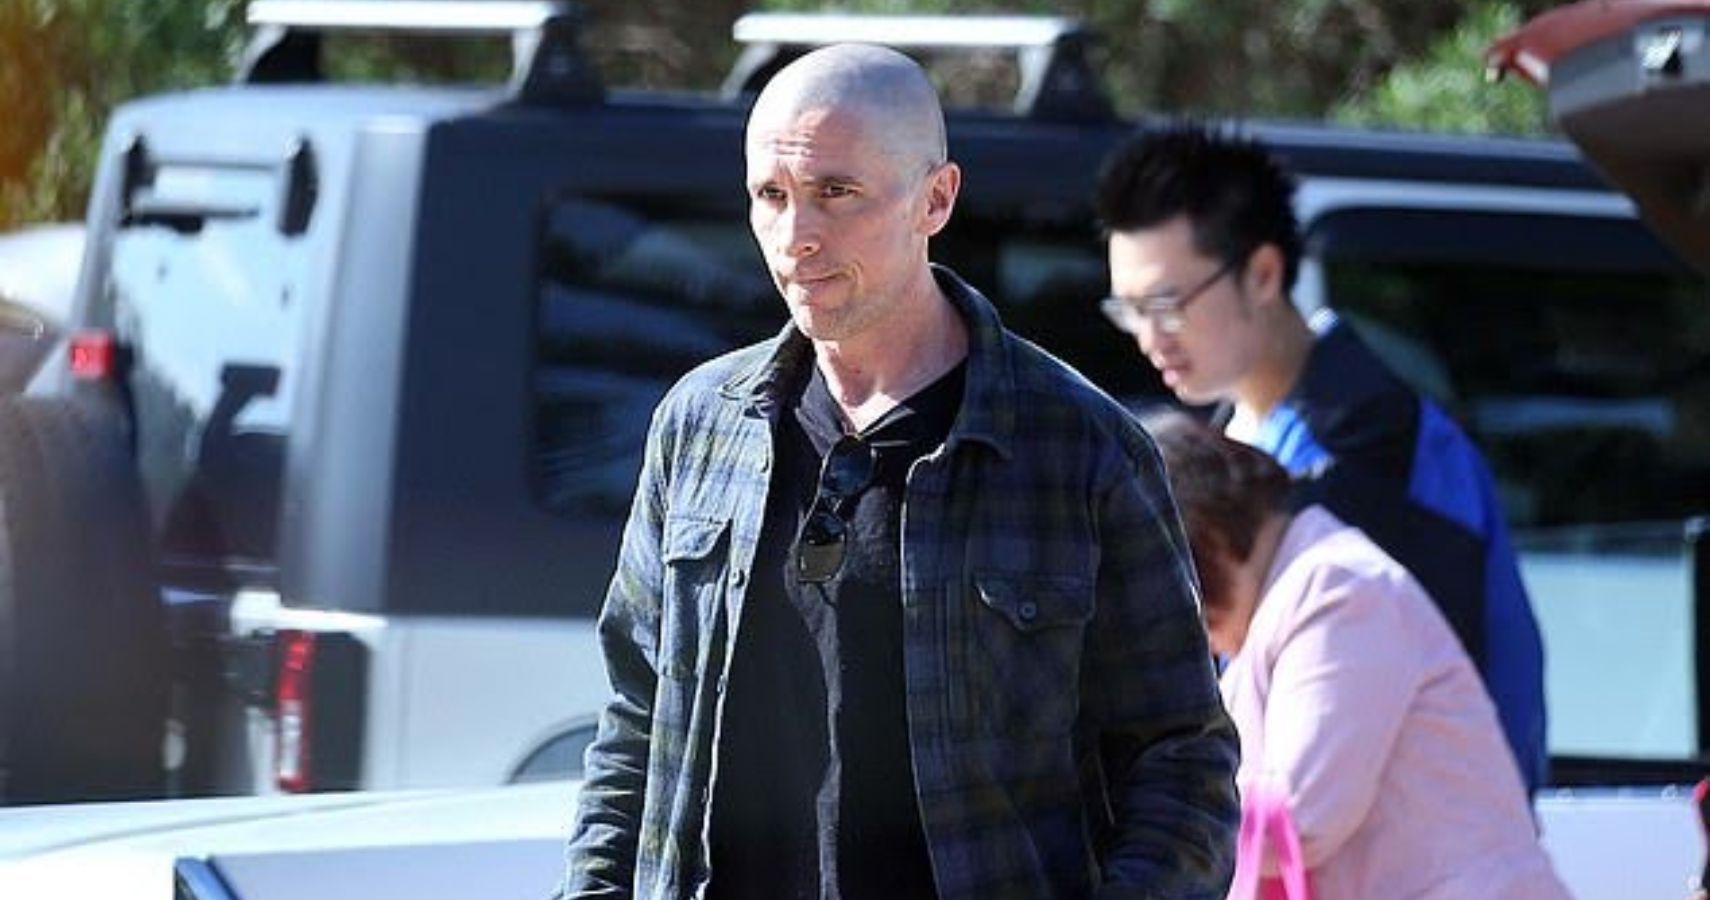 Christian Bale Shaves Head For Gorr The God Butcher Role In Thor: Love